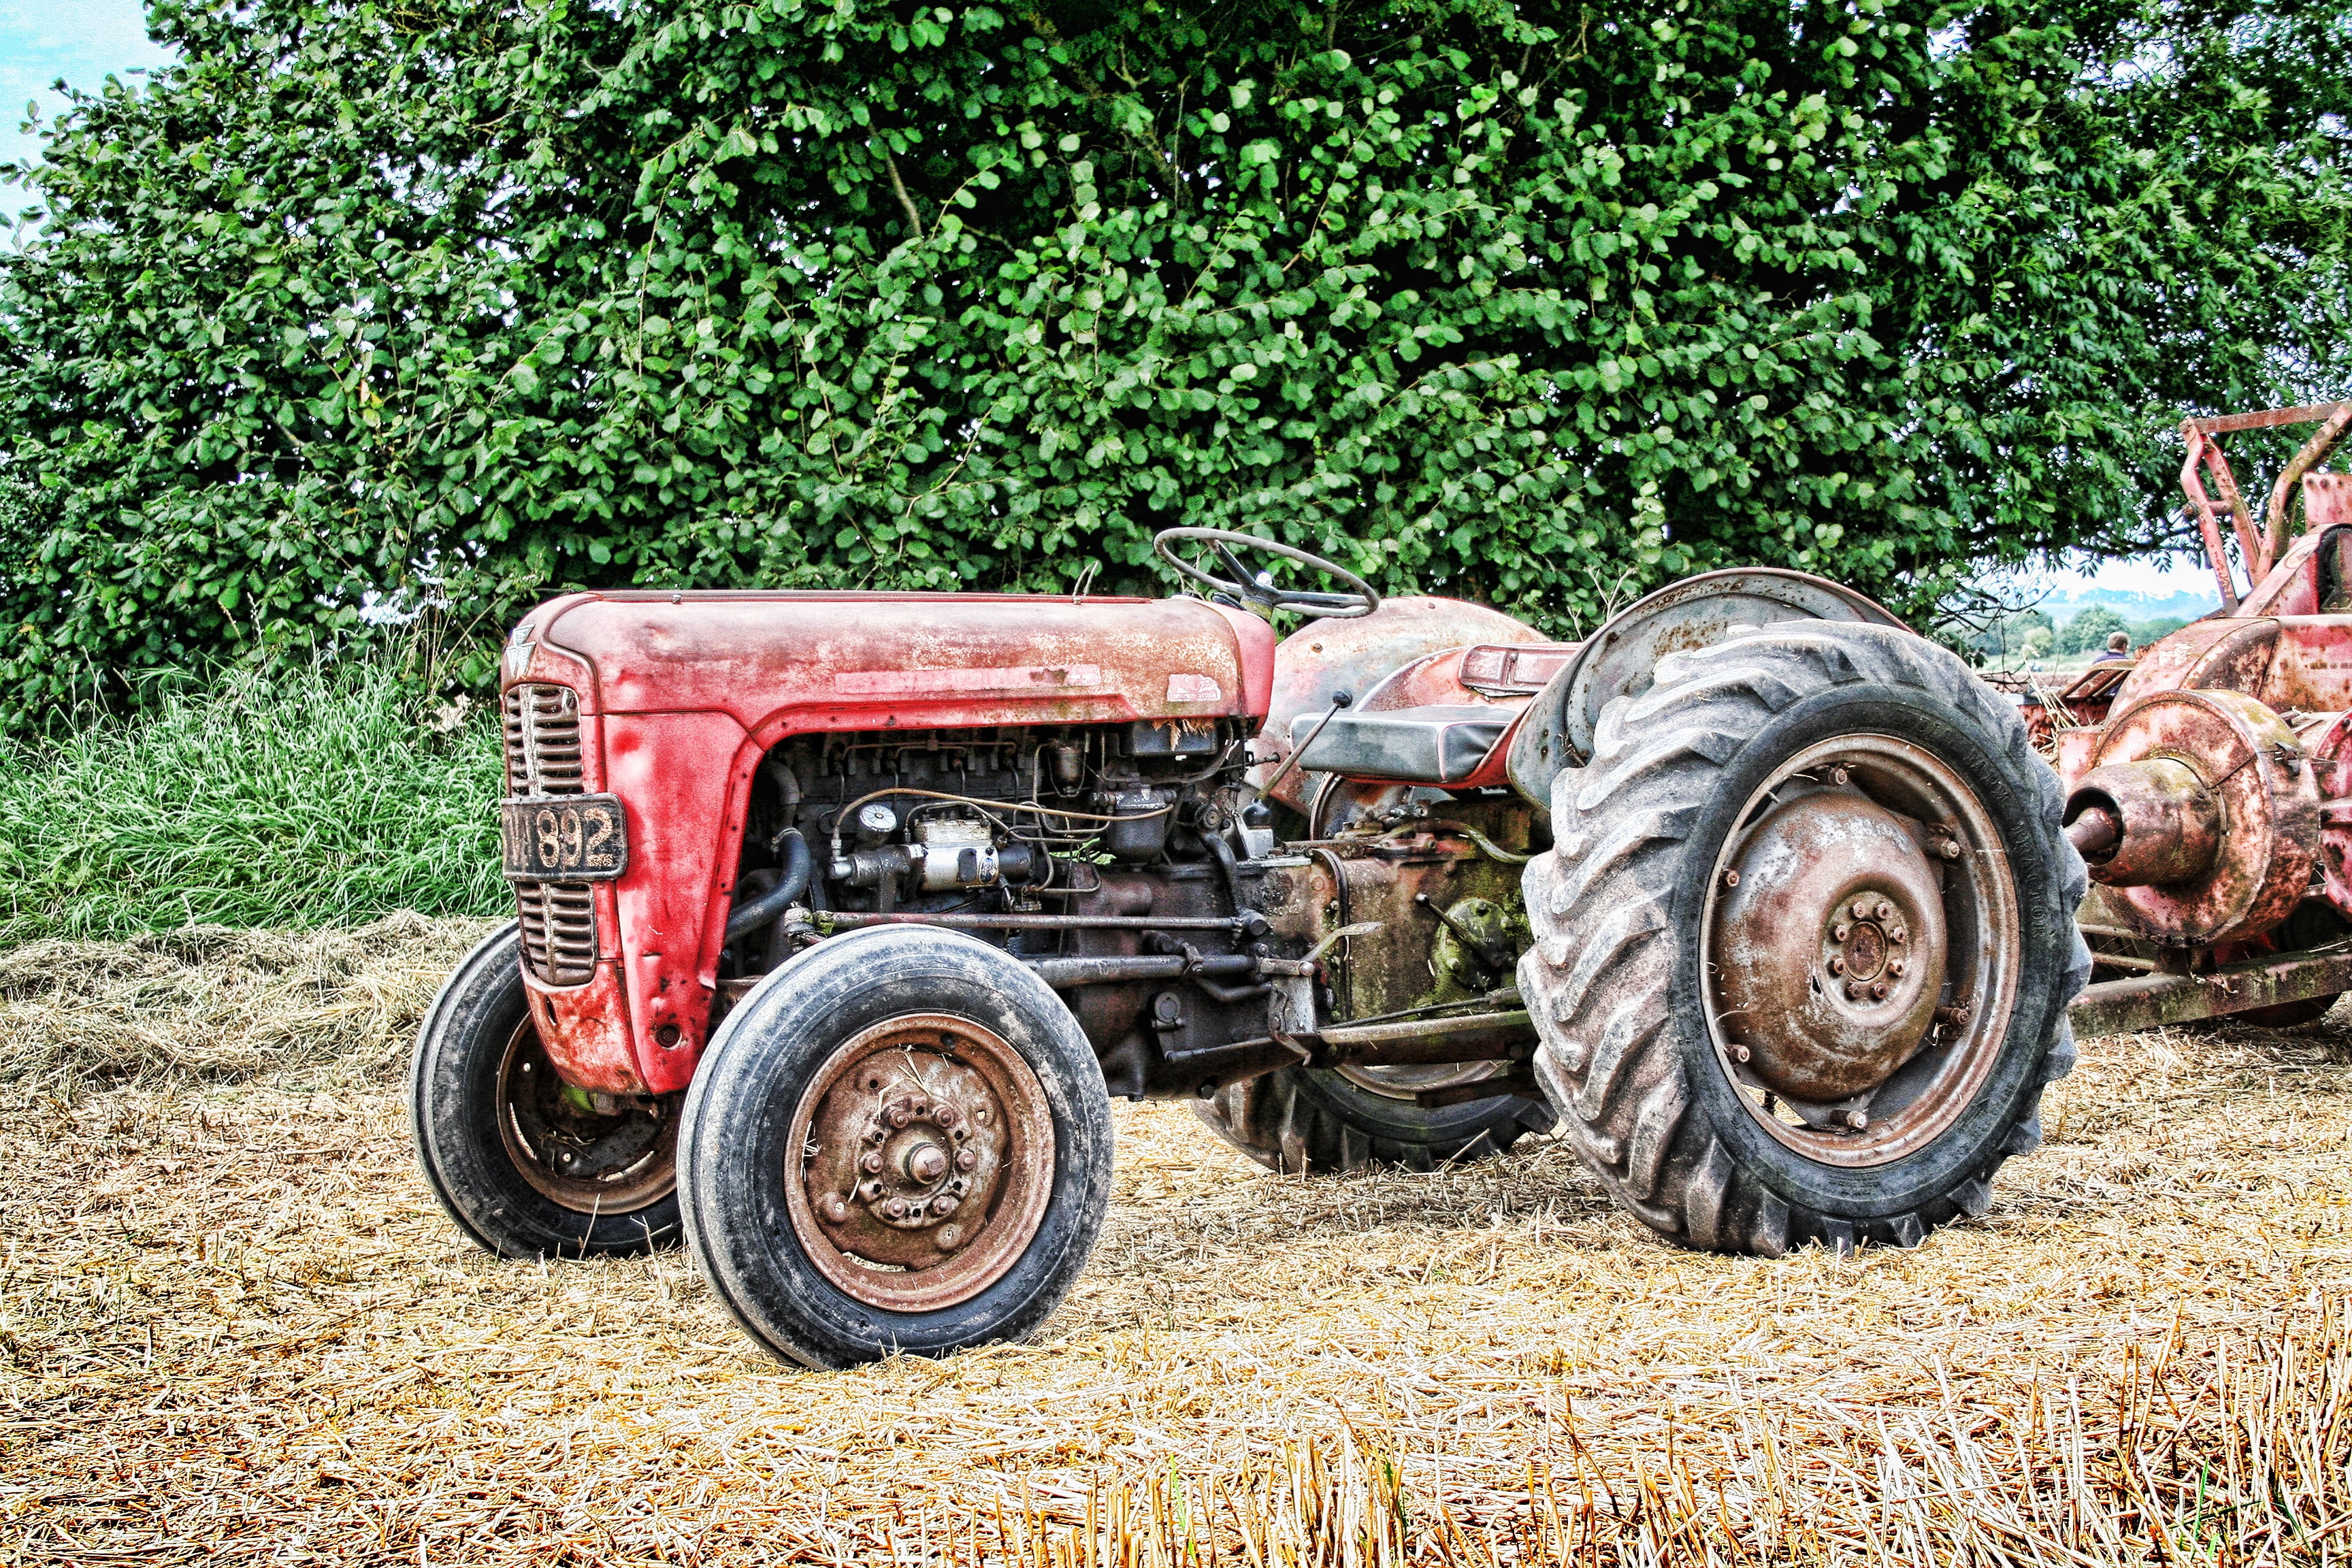 tractor, vintage, farming, agriculture, equipment, machine